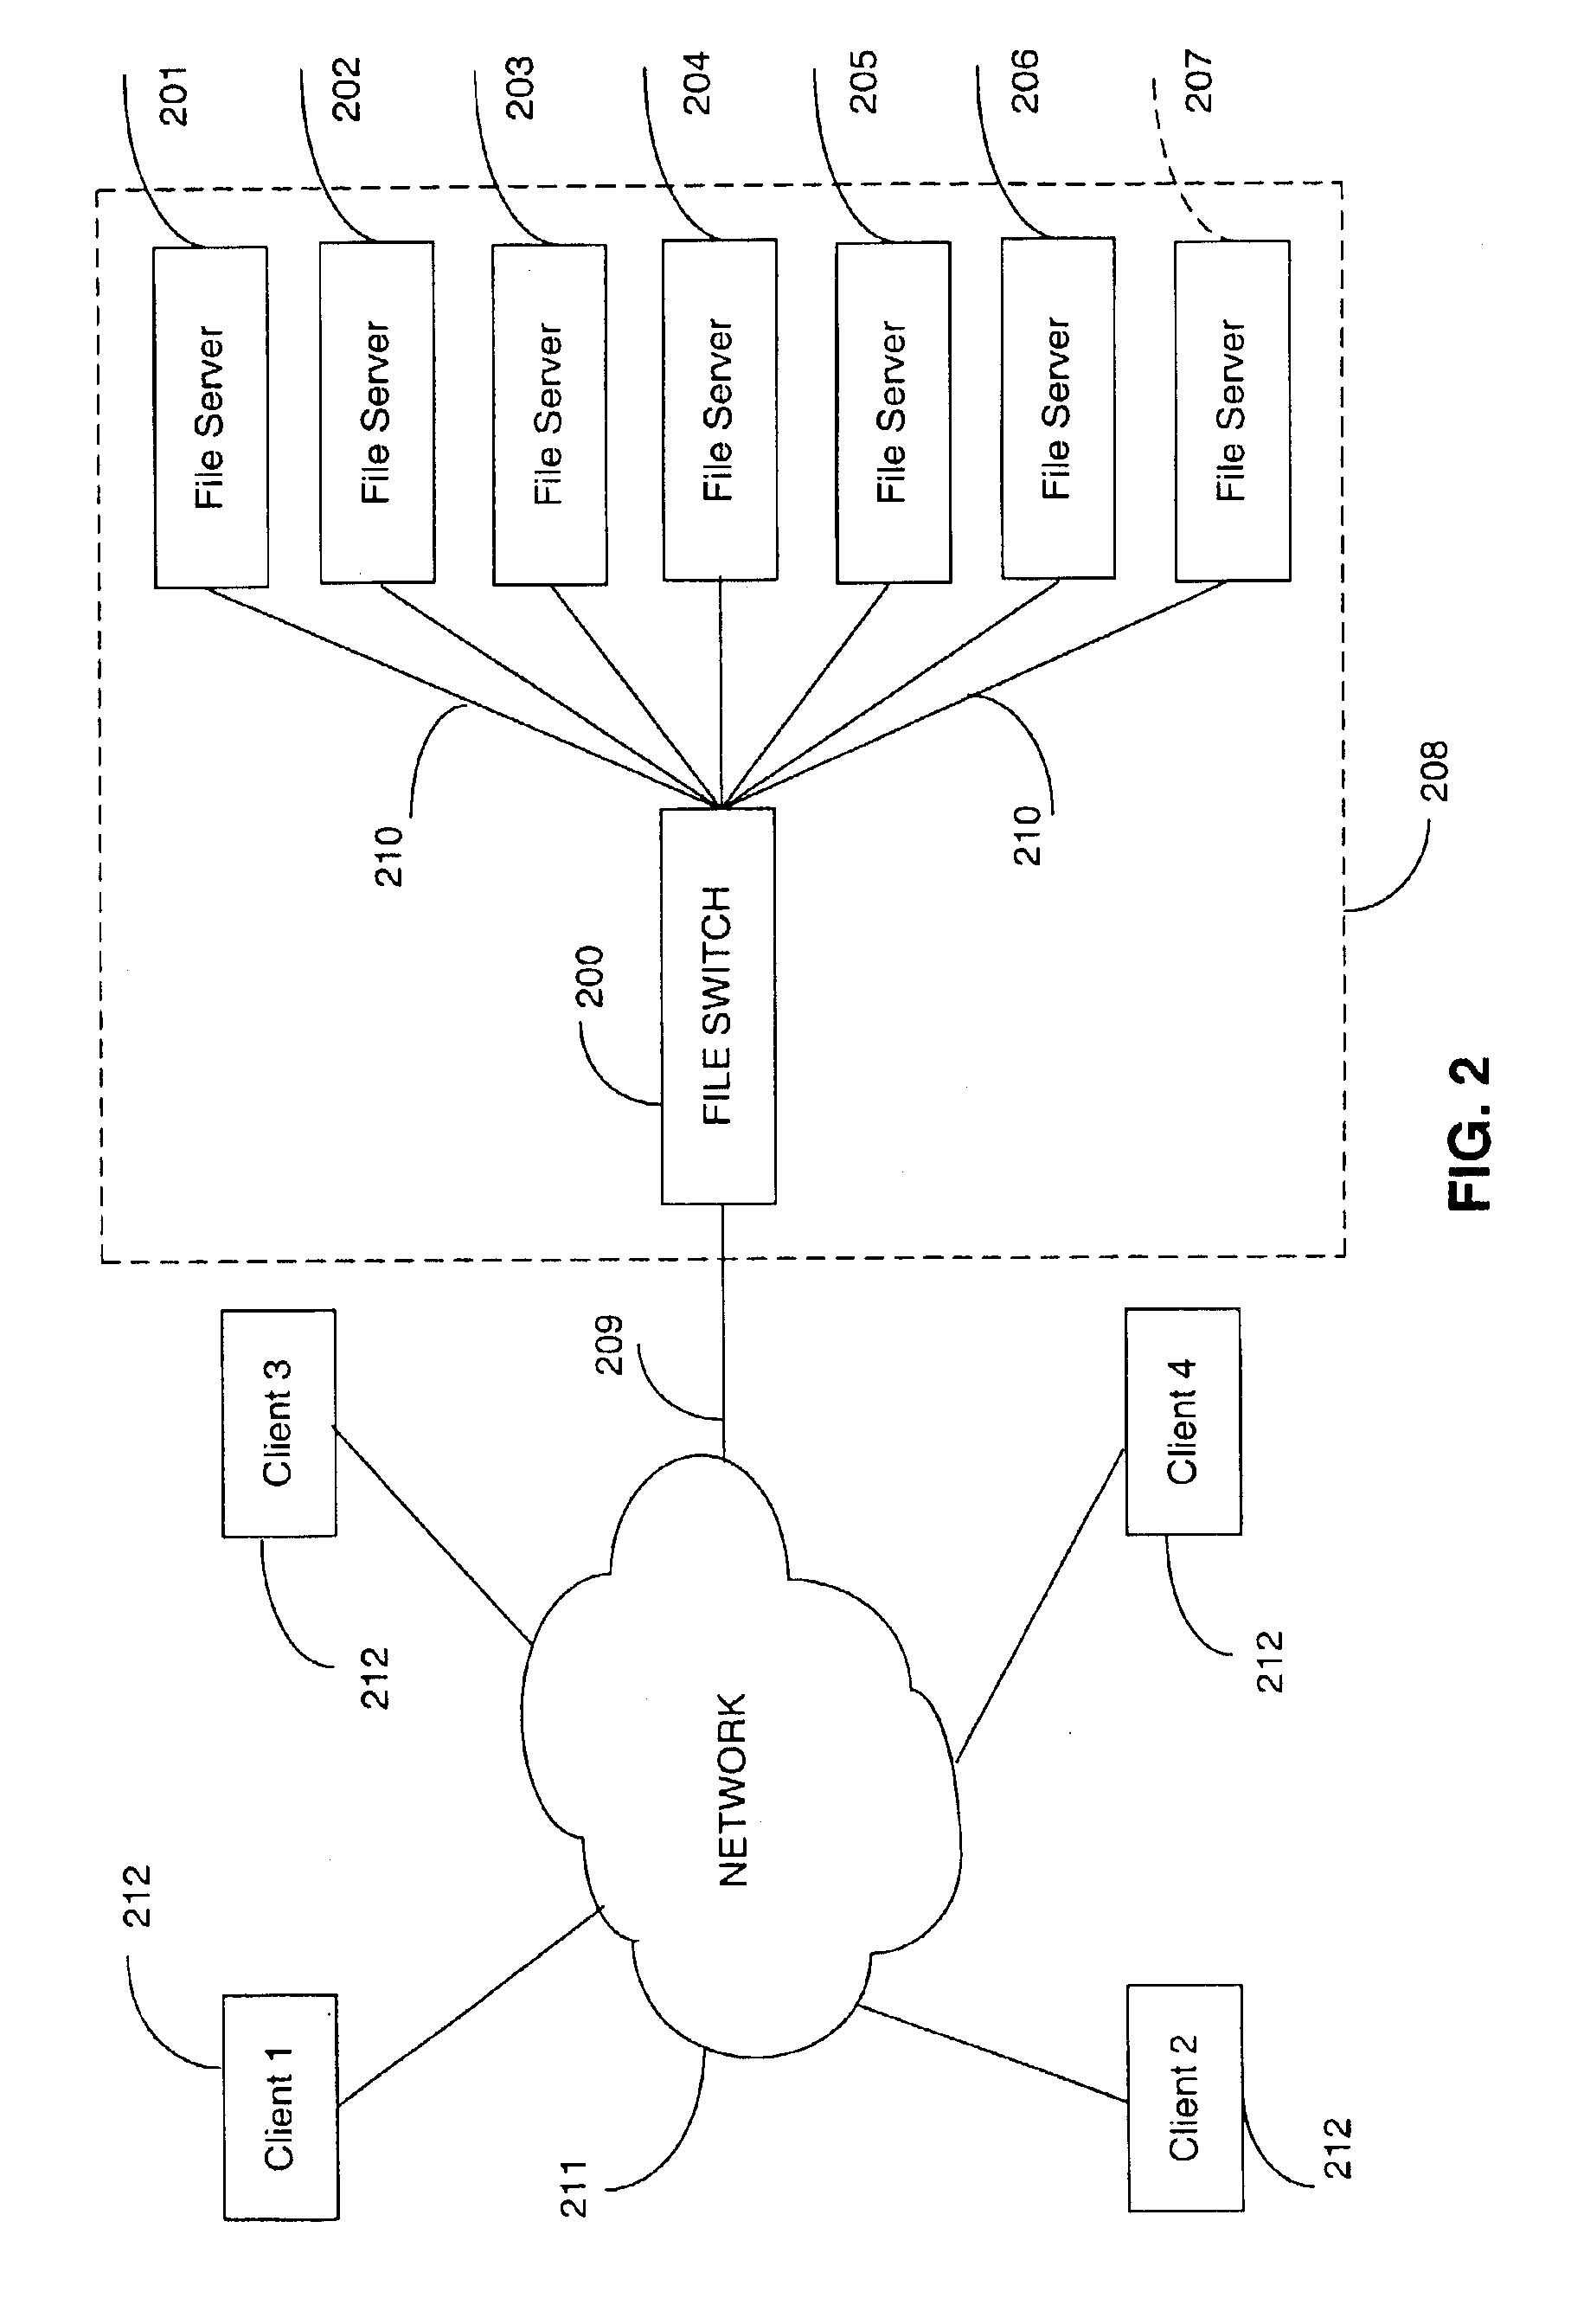 Transaction aggregation in a switched file system